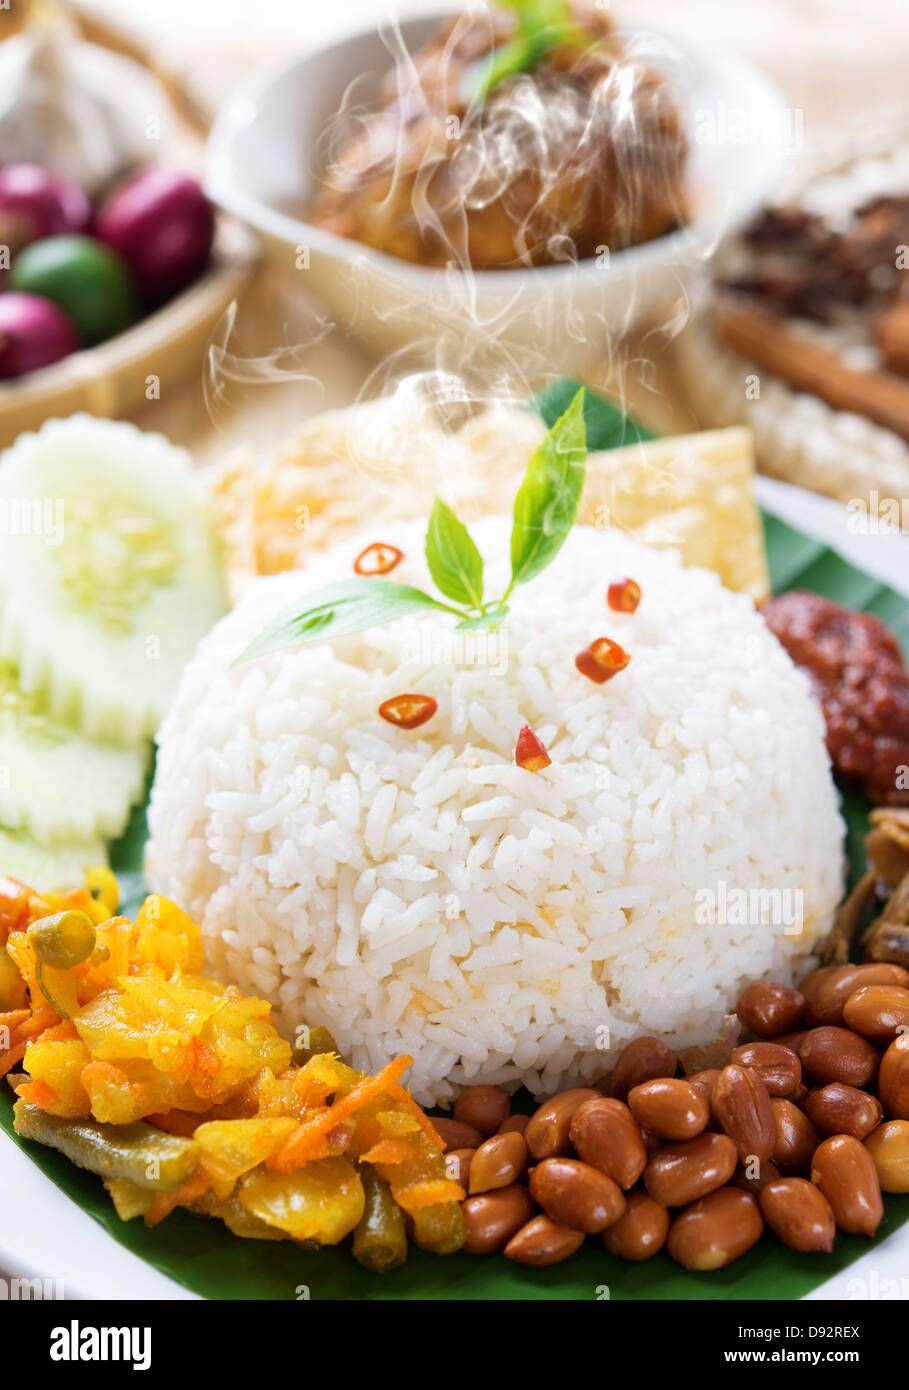 Nasi lemak traditional malaysia spicy rice dish, fresh cooked with hot steam. Served with belacan, ikan bilis, acar, peanuts and cucumber. Decoration setup, malaysian cuisine. Stock Photo